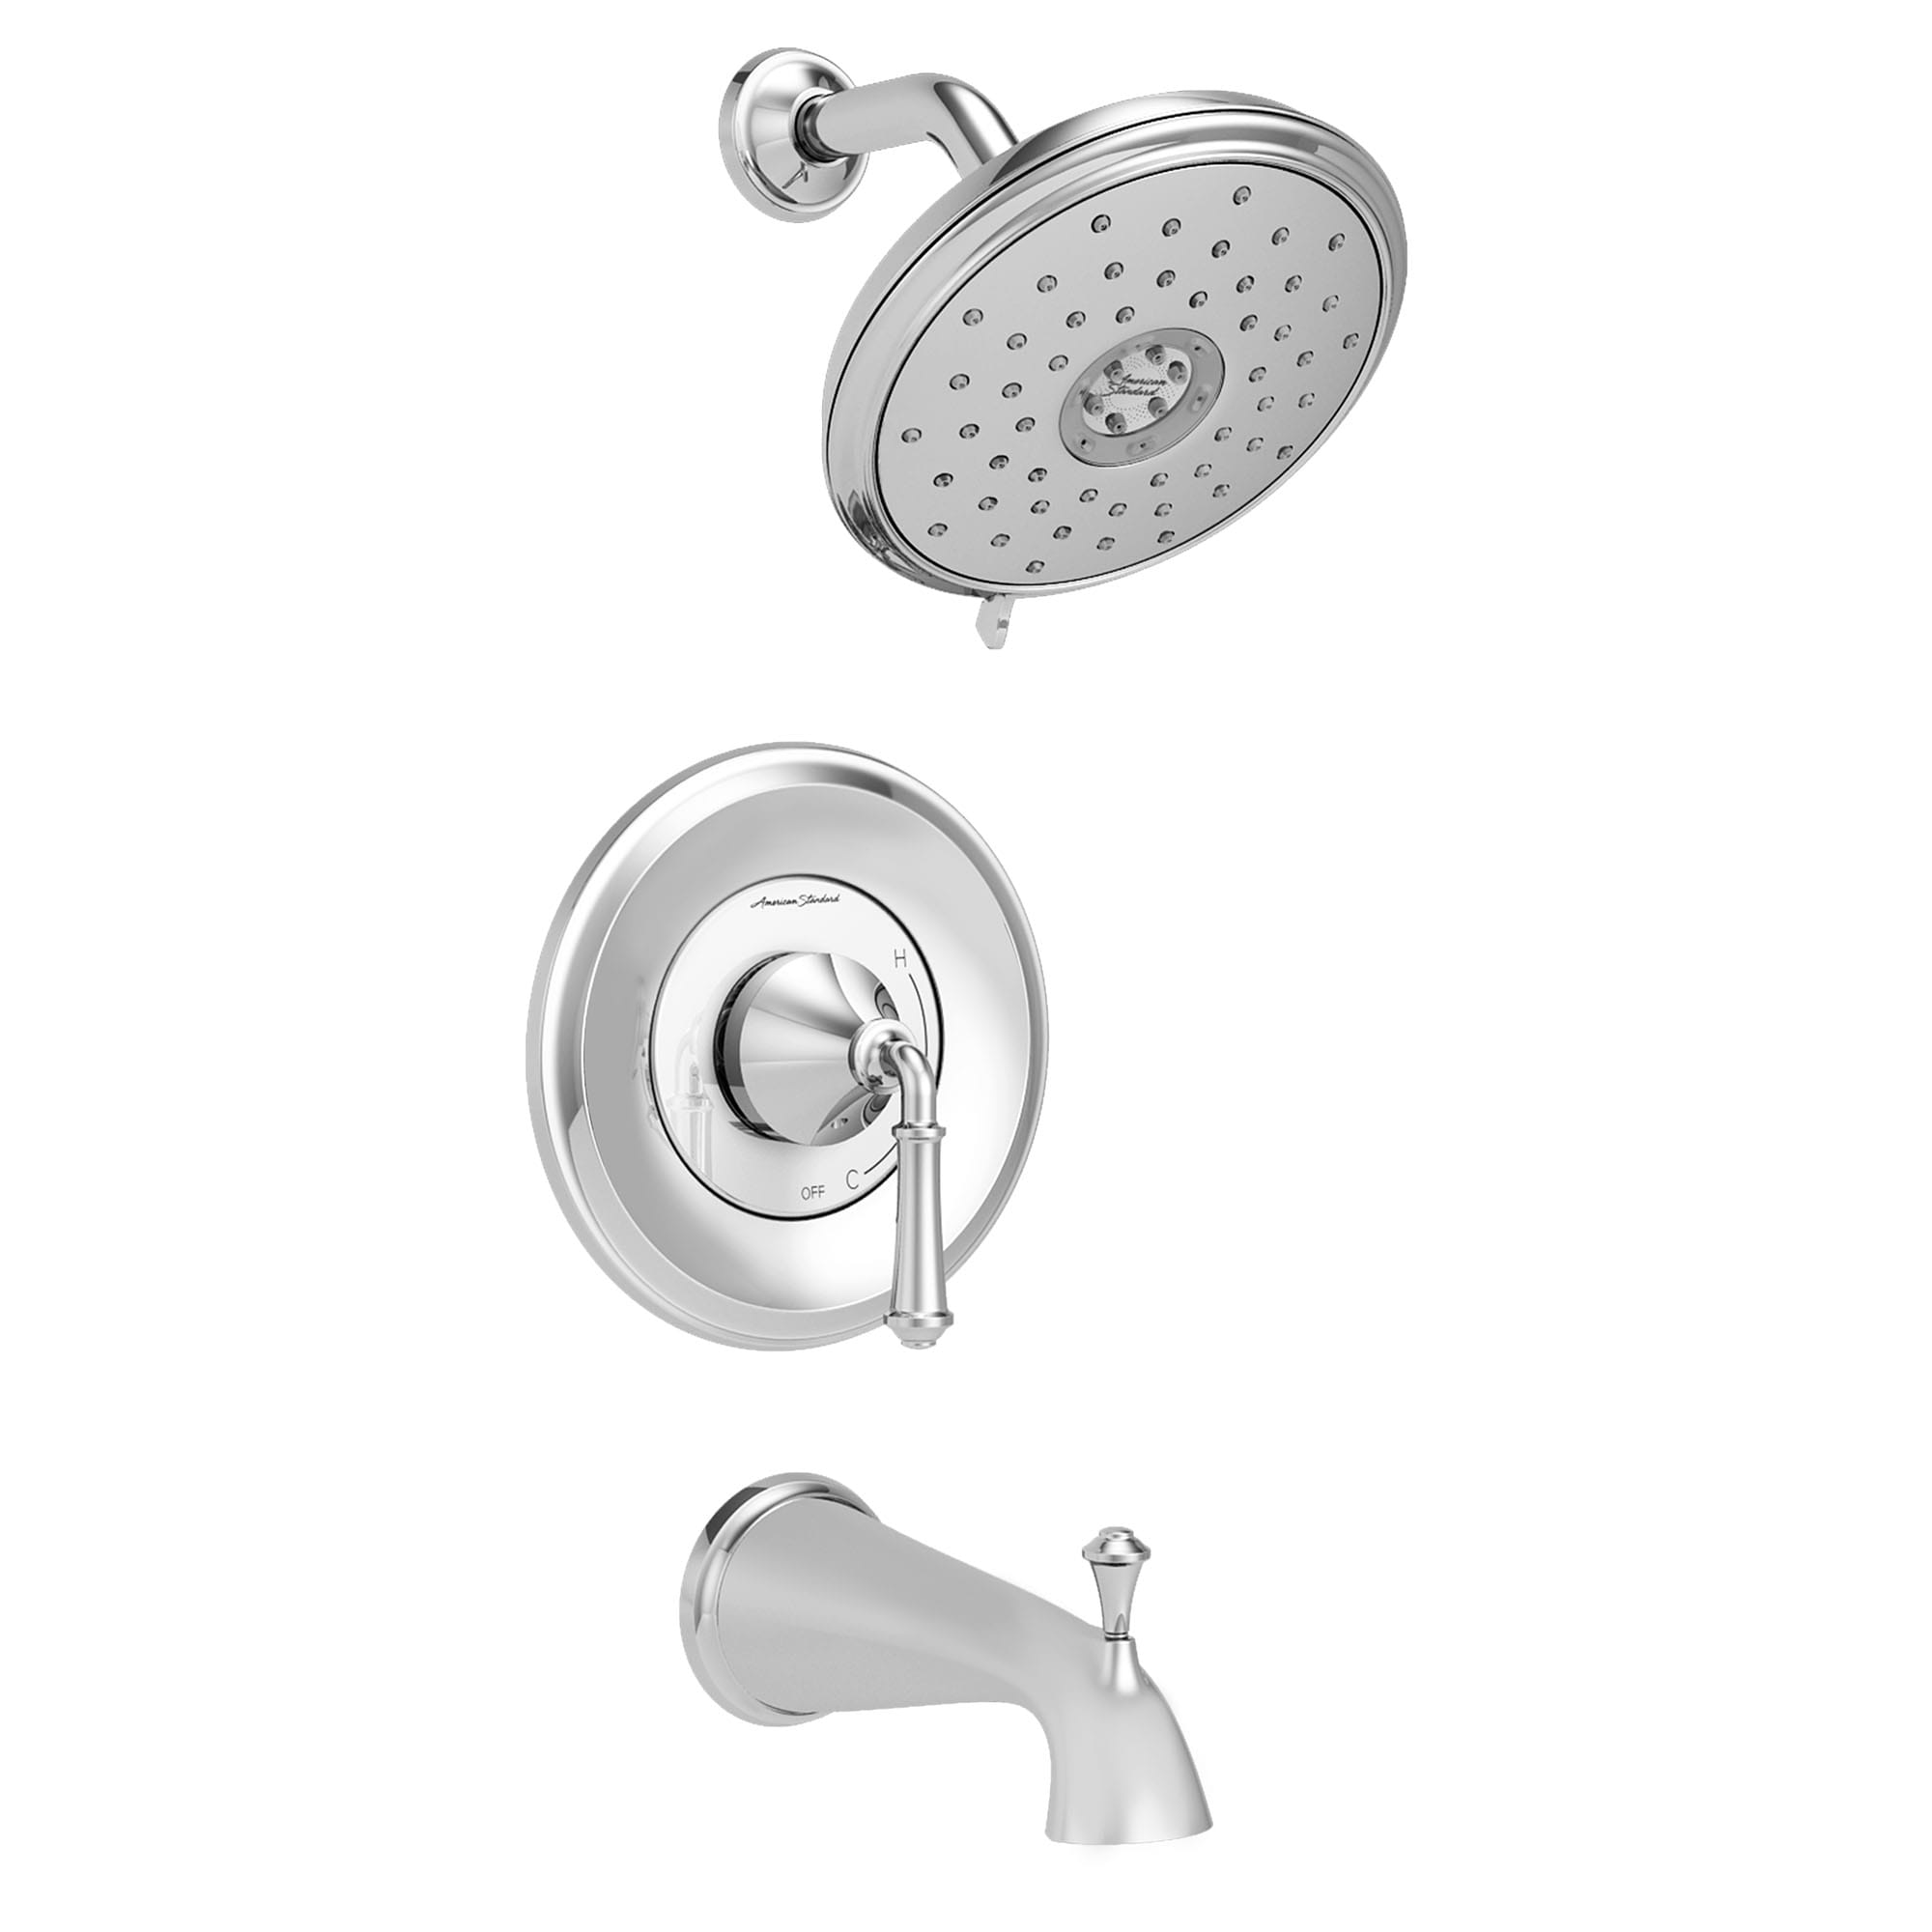 Delancey 25 gpm 94 L min Tub and Shower Trim Kit With 4 Function Showerhead and Lever Handle CHROME